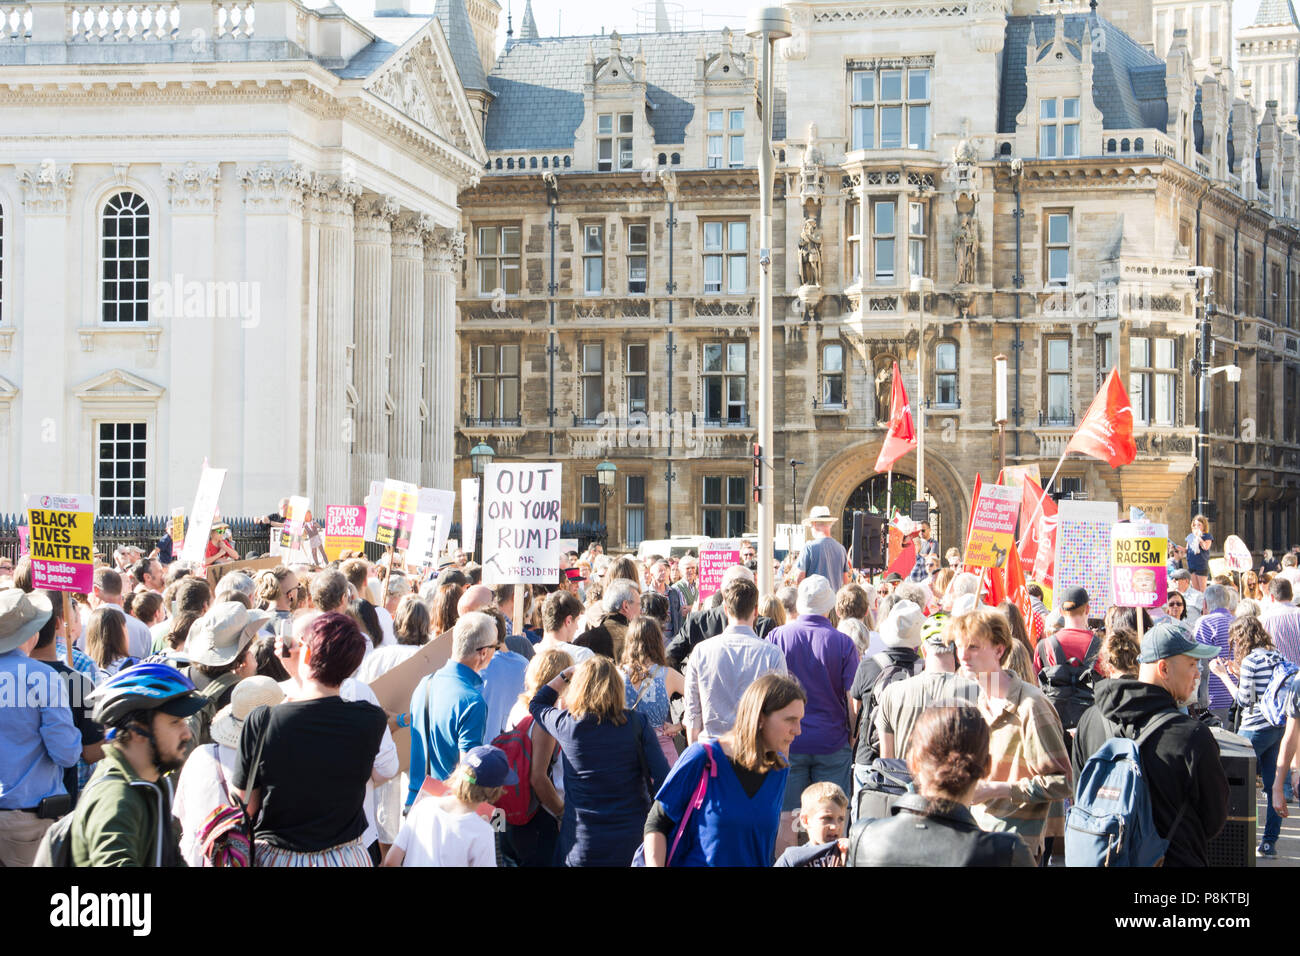 Cambridge uk, 2018-07-12,People have gathered in the centre of Cambridge after Donald Trump makes an official visit to the UK as US president.Stand Up To Racism campaigners have organised the protest in King's Parade Cambridge this evening. Credit: kevin Hodgson/Alamy Live News Stock Photo